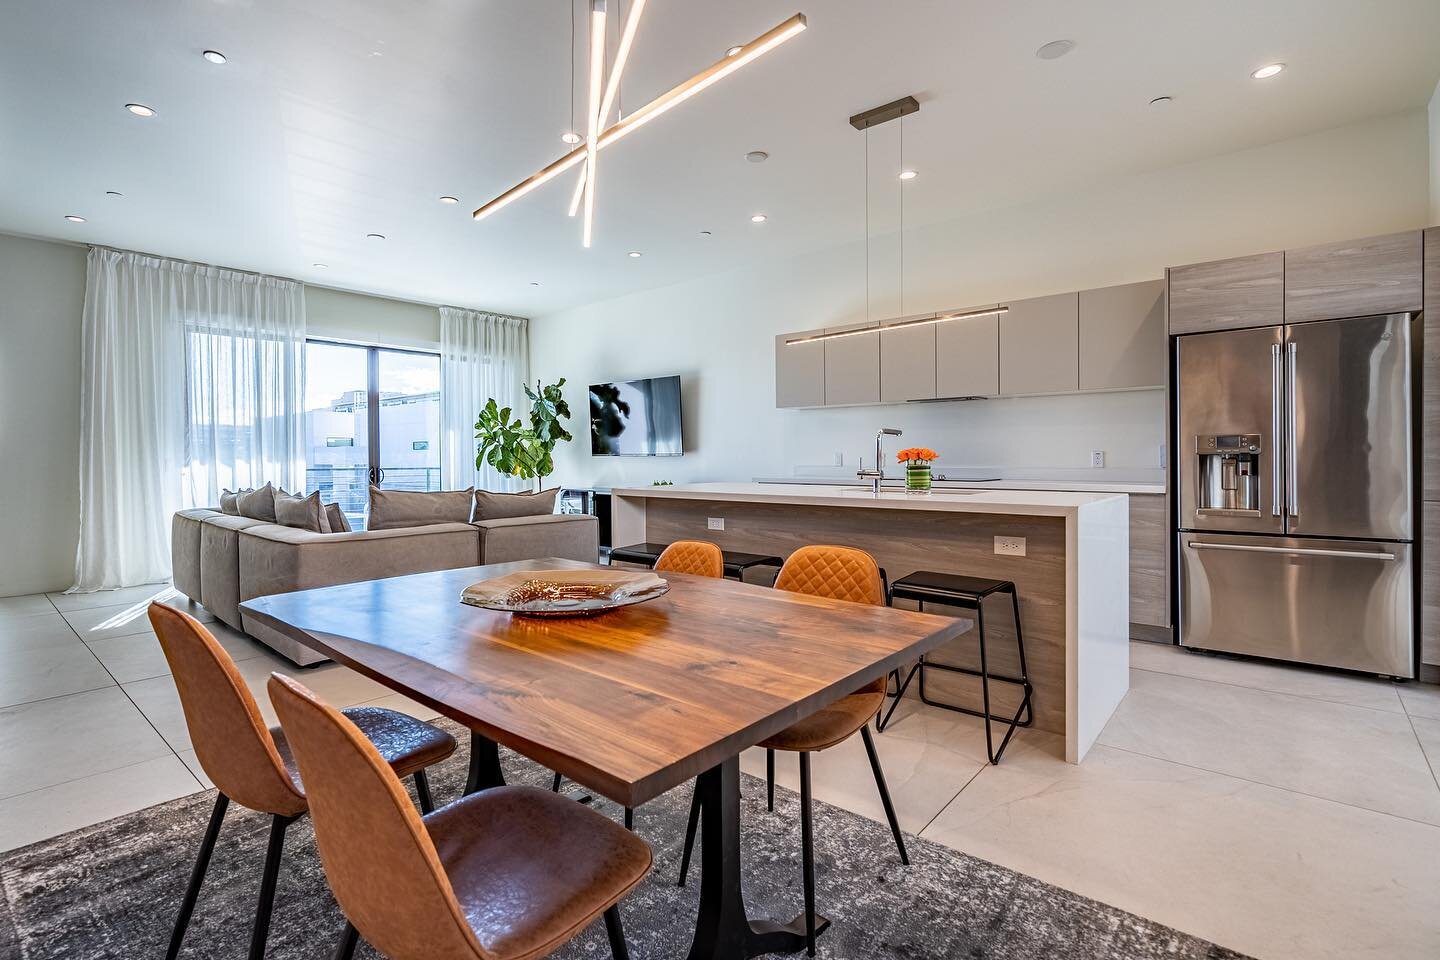 Airy, spacious, functional. Come stay with us.

#mzlux #mzluxscottsdale #mzluxairbnb #airbnb #airbnbhost #stayinscottsdale #vacationhome #airbnbhomes #airbnbluxury #luxuryairbnb #mzscottsdale #downtownscottsdale #scottsdaleairbnb #airbnbscottsdale #s